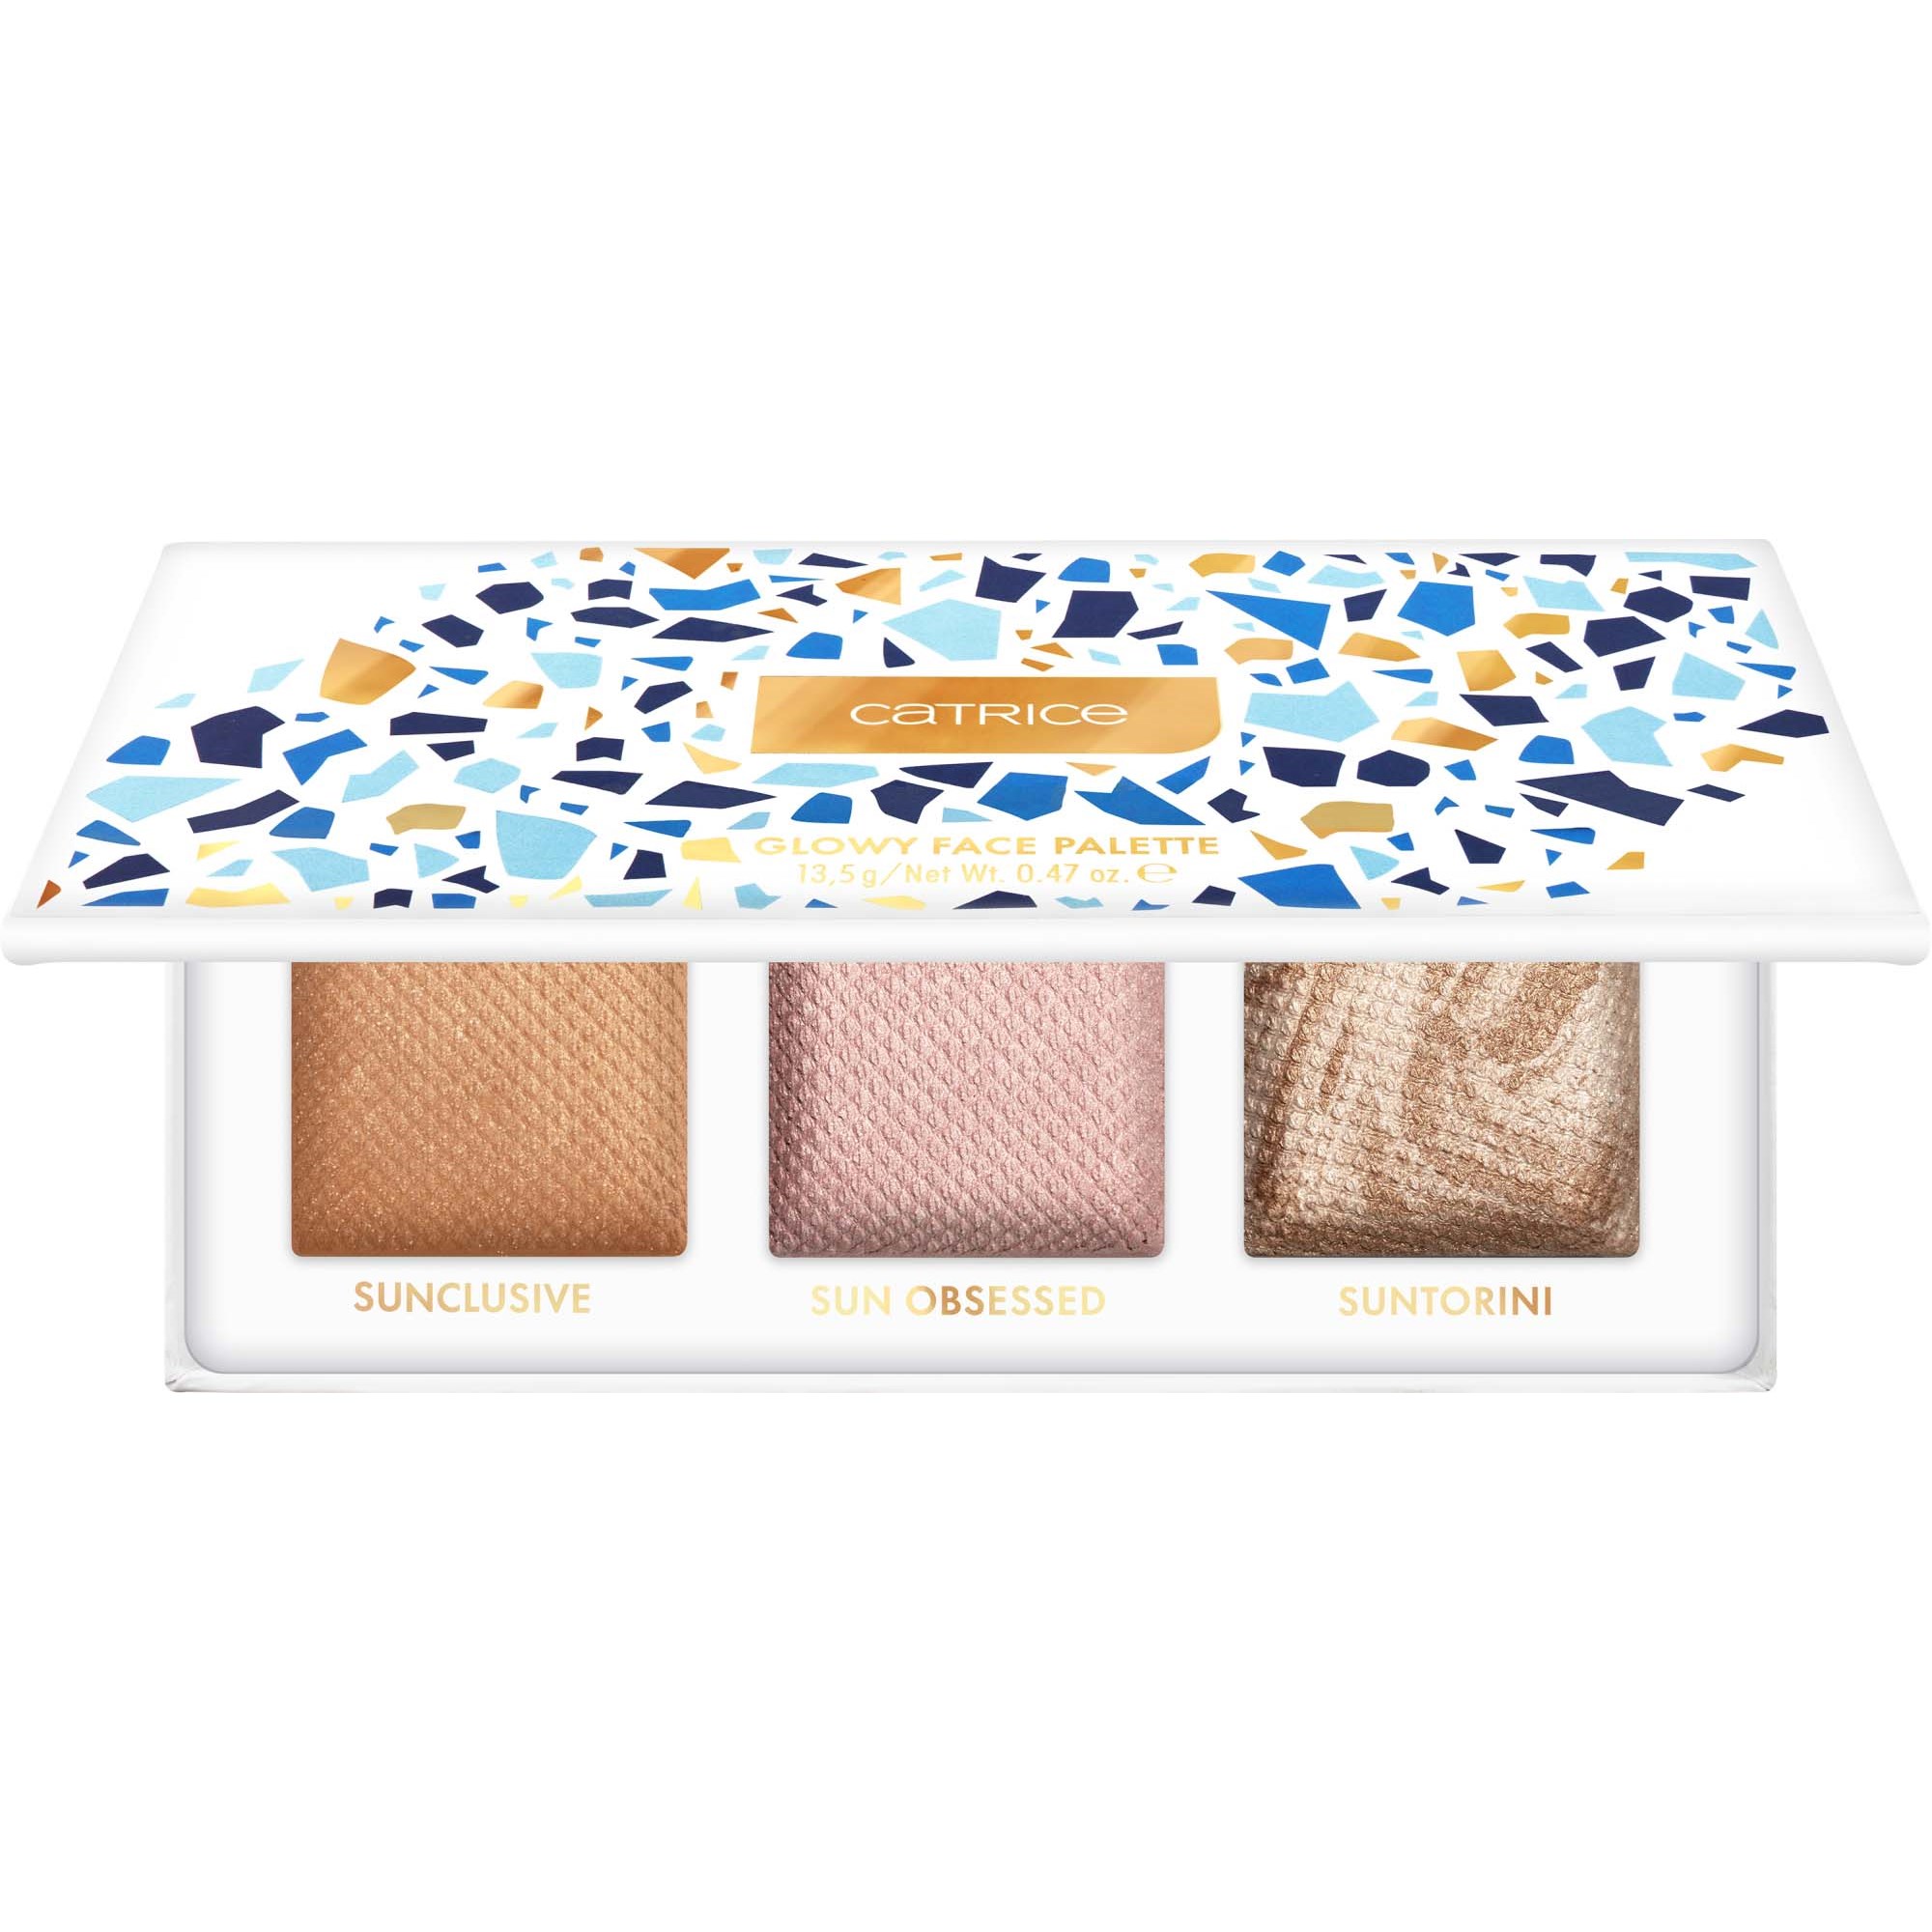 Catrice Summer Obsessed Glowy Face Palette